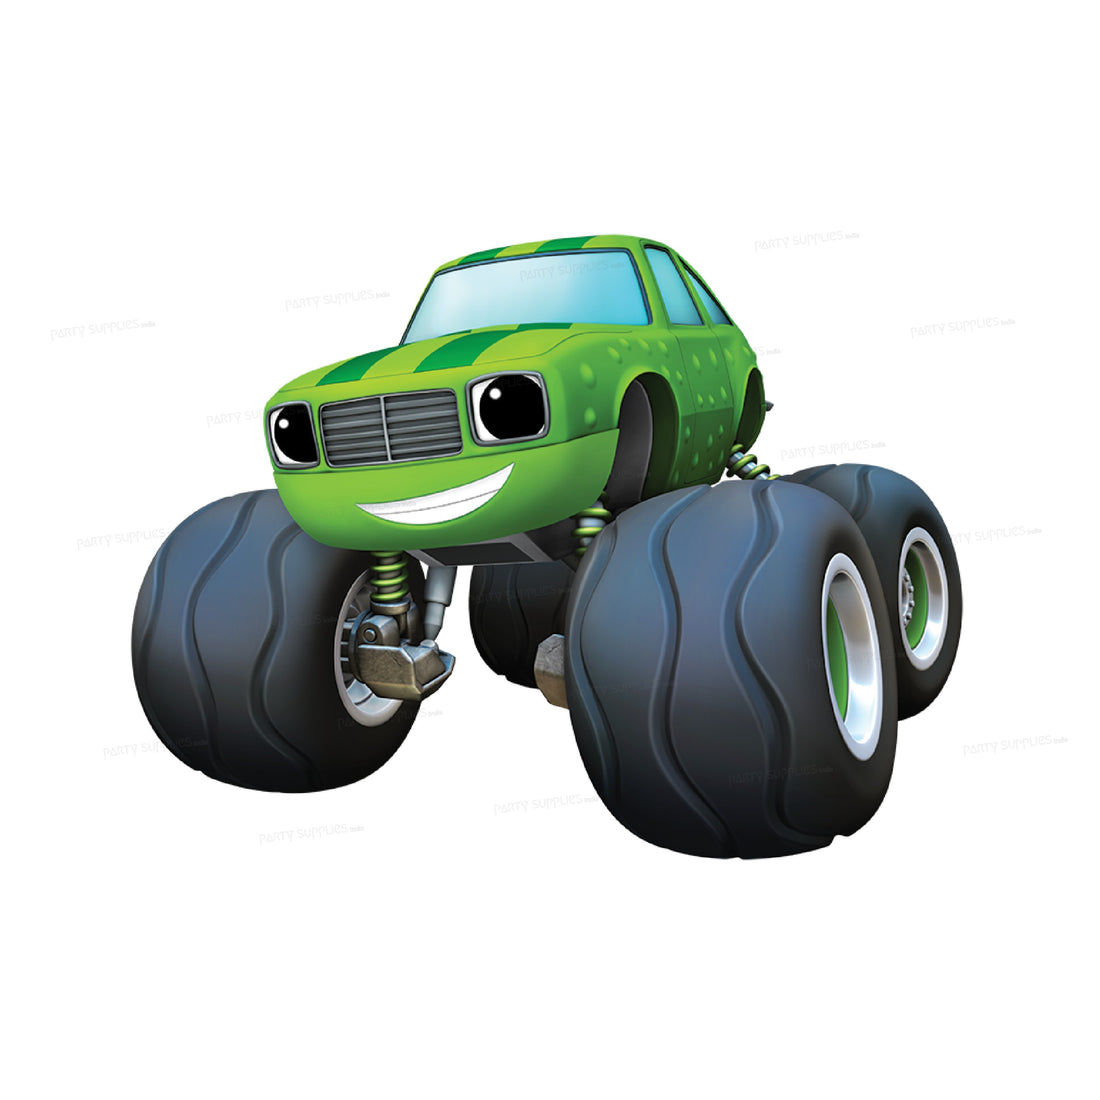 PSI Blaze and the Monster Machines Theme Cutout - 06